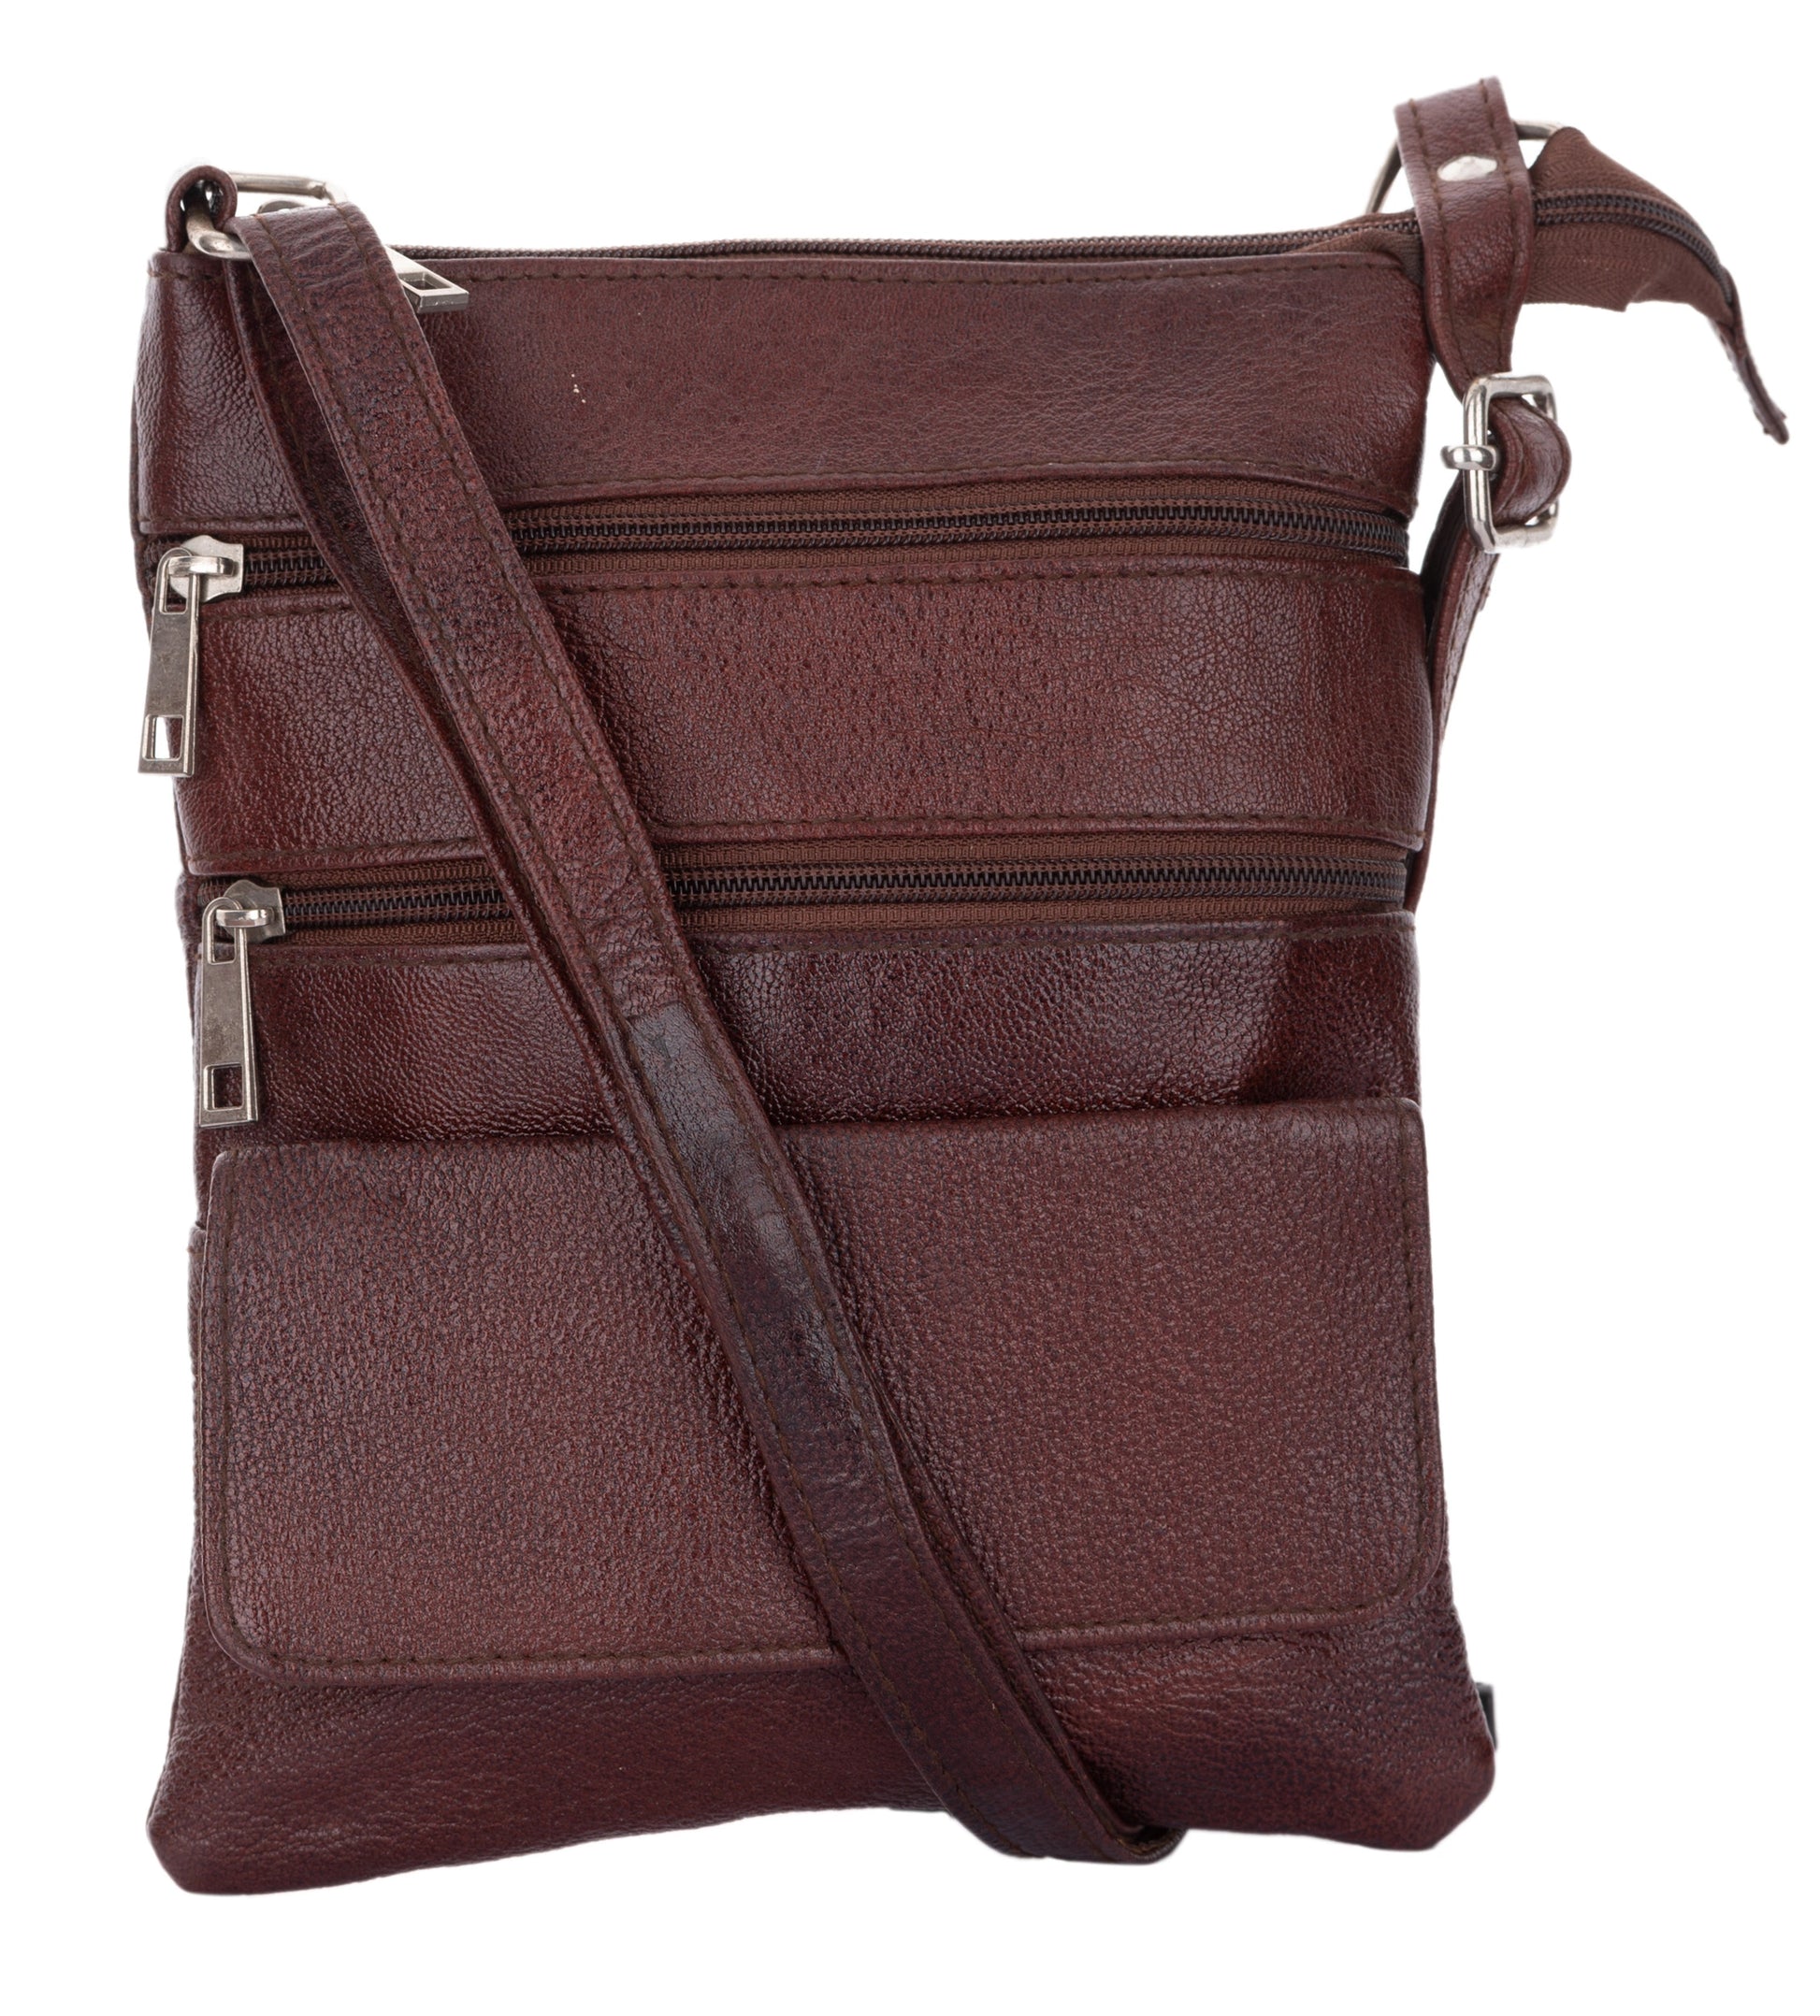 pure-leather-unisex-brown-cross-body-sling-messanger-bag-11-9-mb03